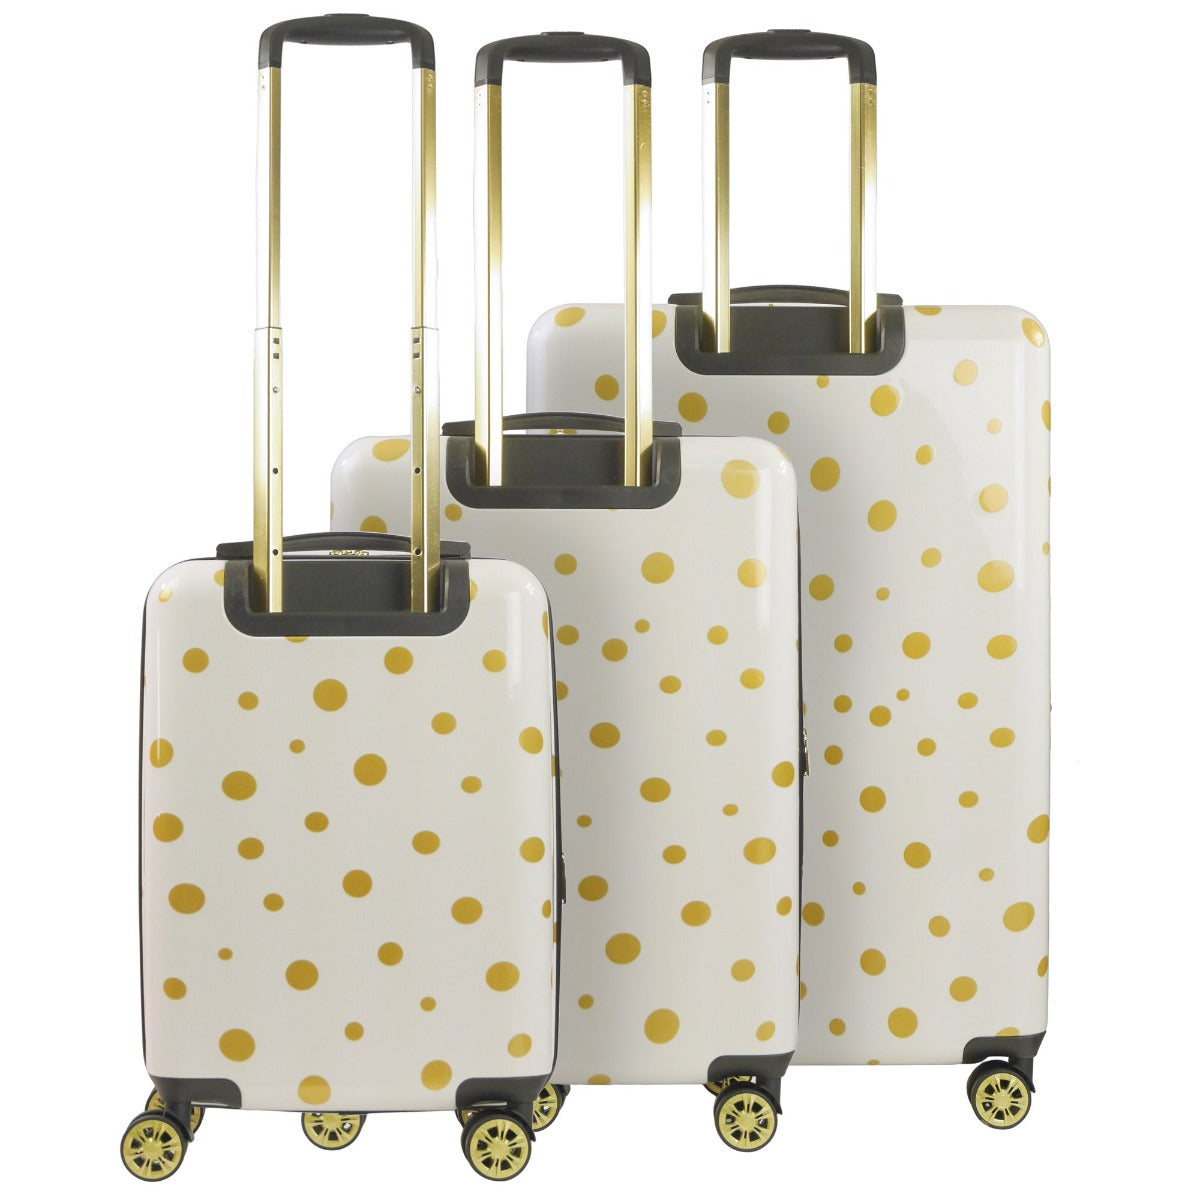 Ful Impulse Mixed Dots Hardsided Spinners suitcase 3 piece luggage set white gold detail polka dots 